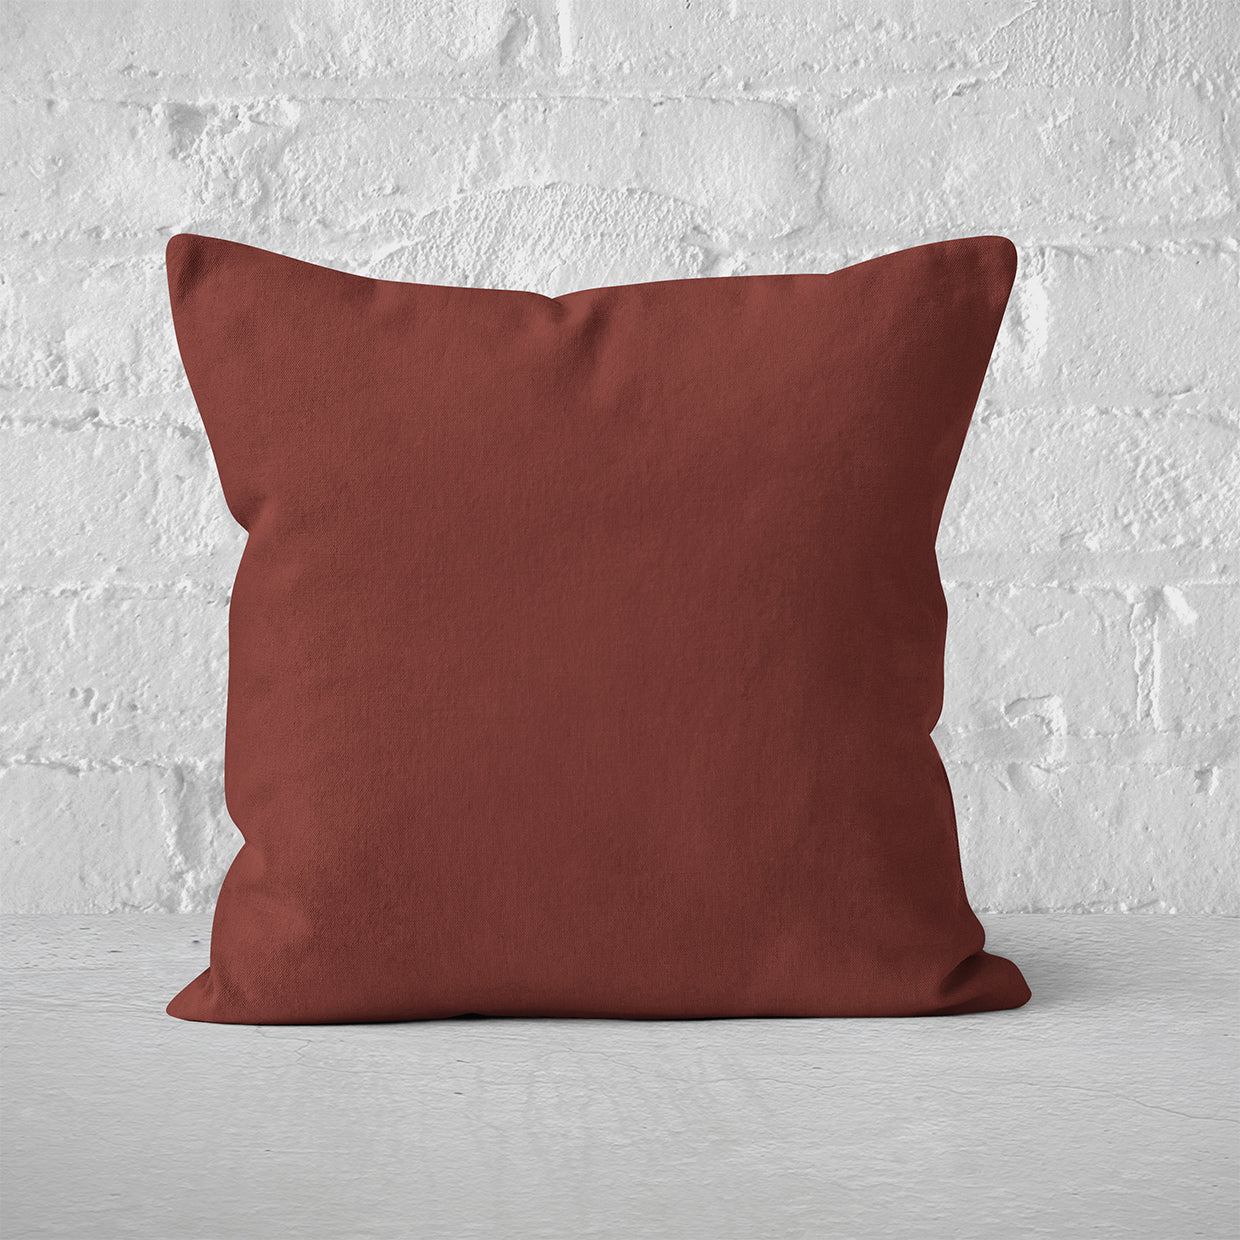 Pillow Cover Art Feature 'Solid' - Brown - Cotton Twill